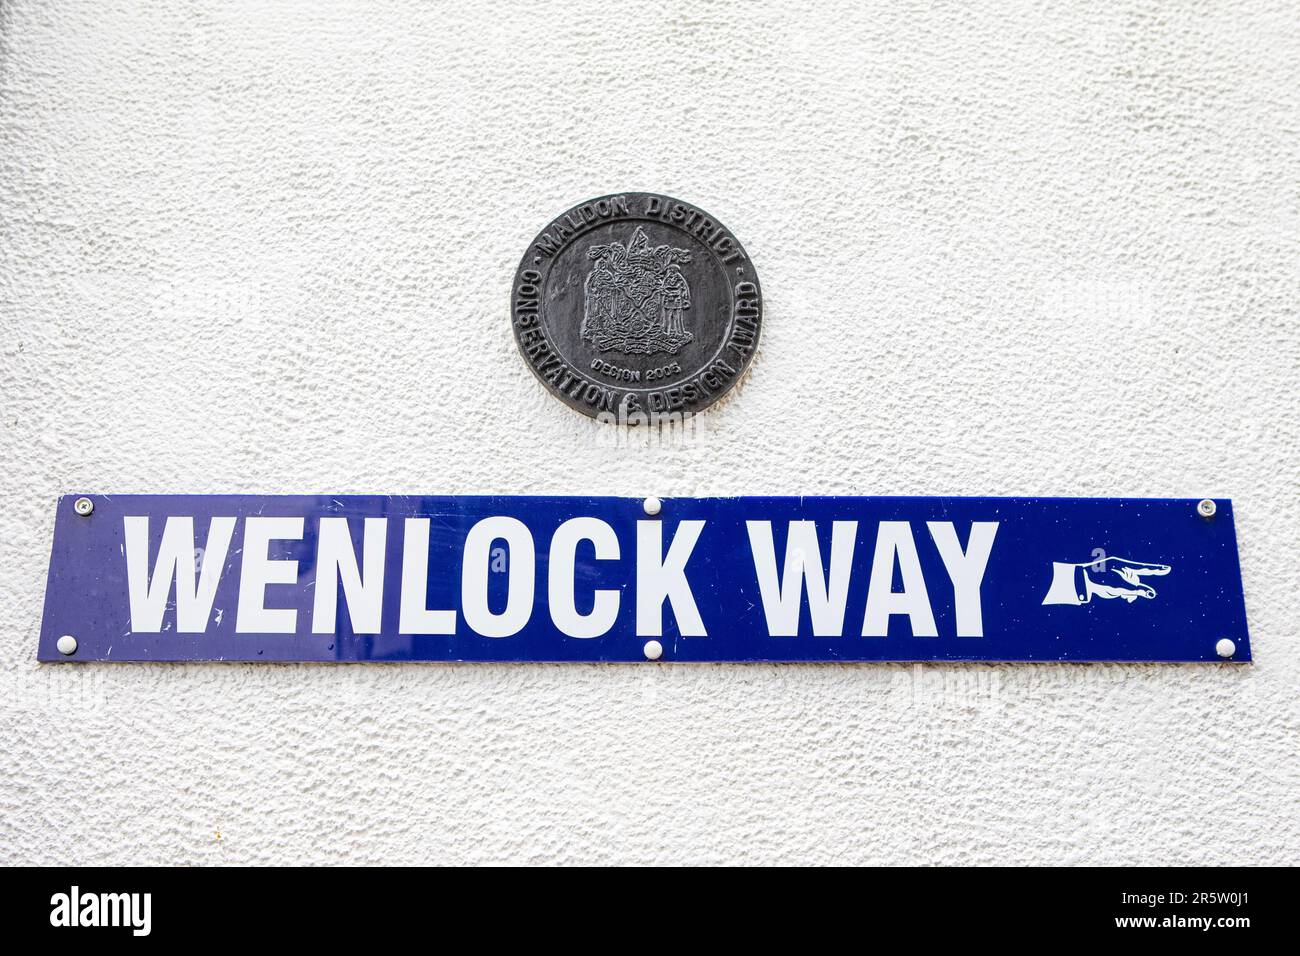 A street sign for Wenlock Way in the town of Maldon in Essex, UK. Stock Photo